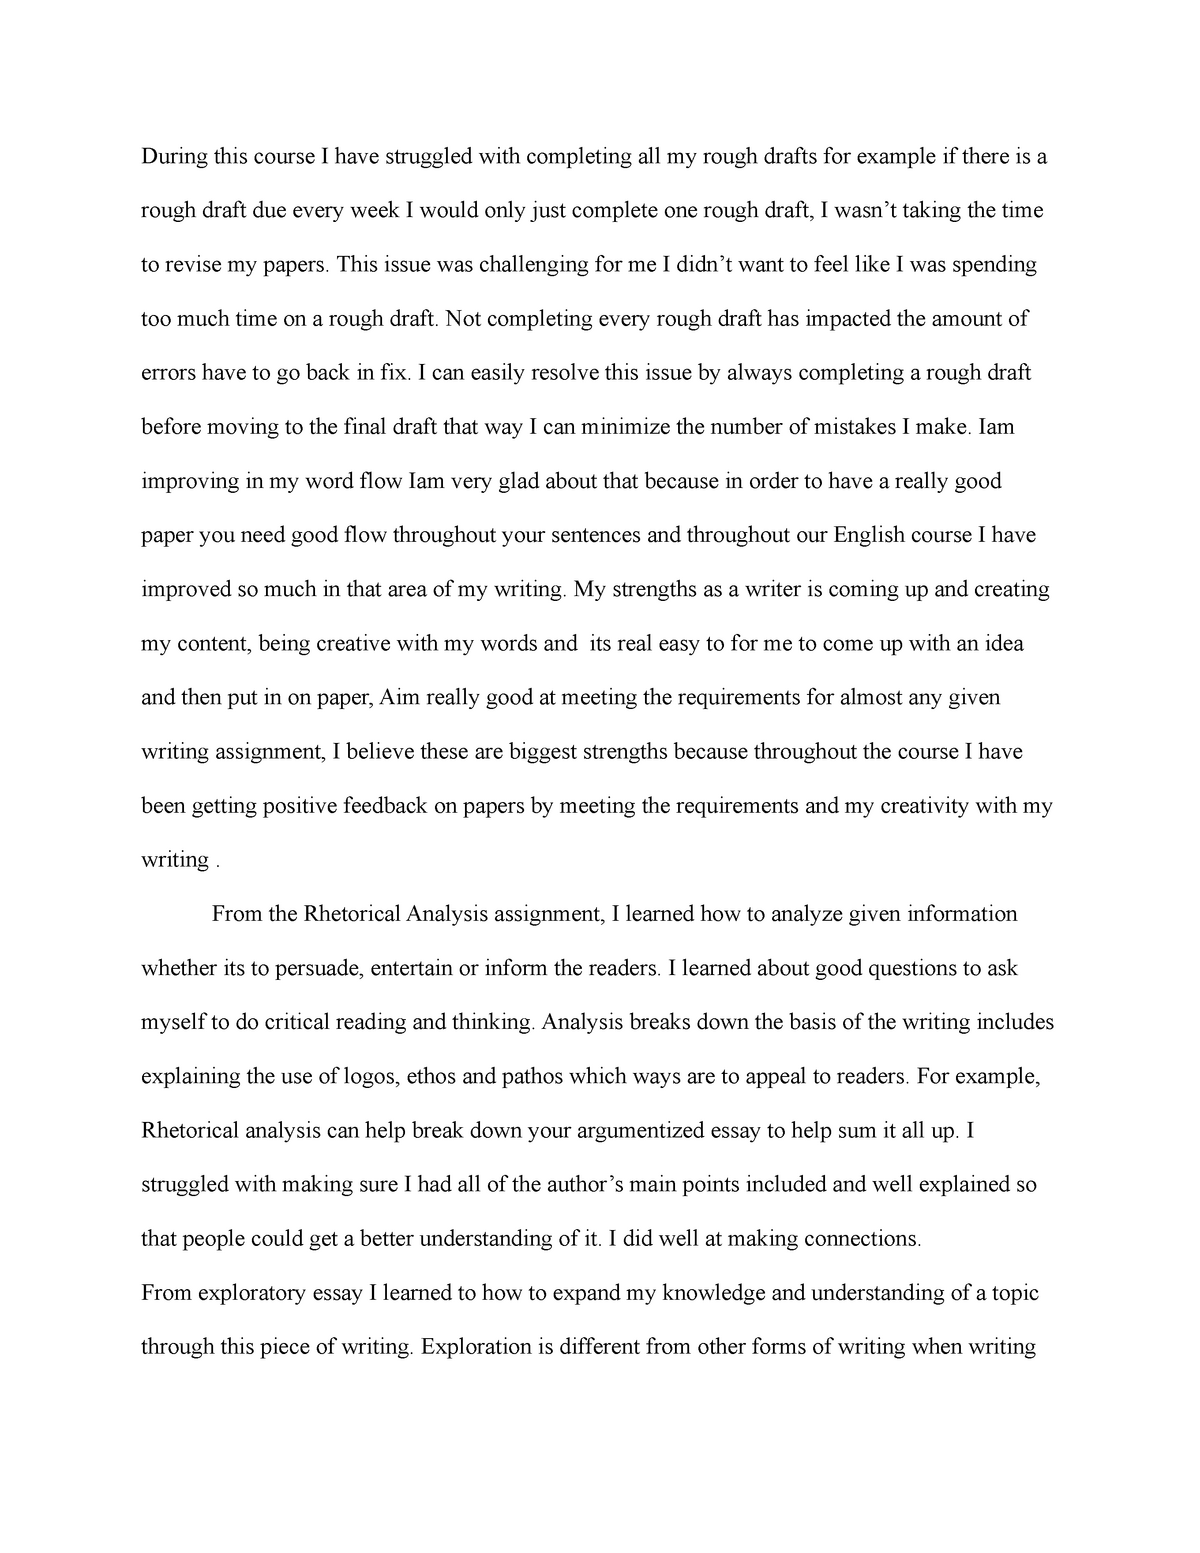 compare and contrast essay rough draft